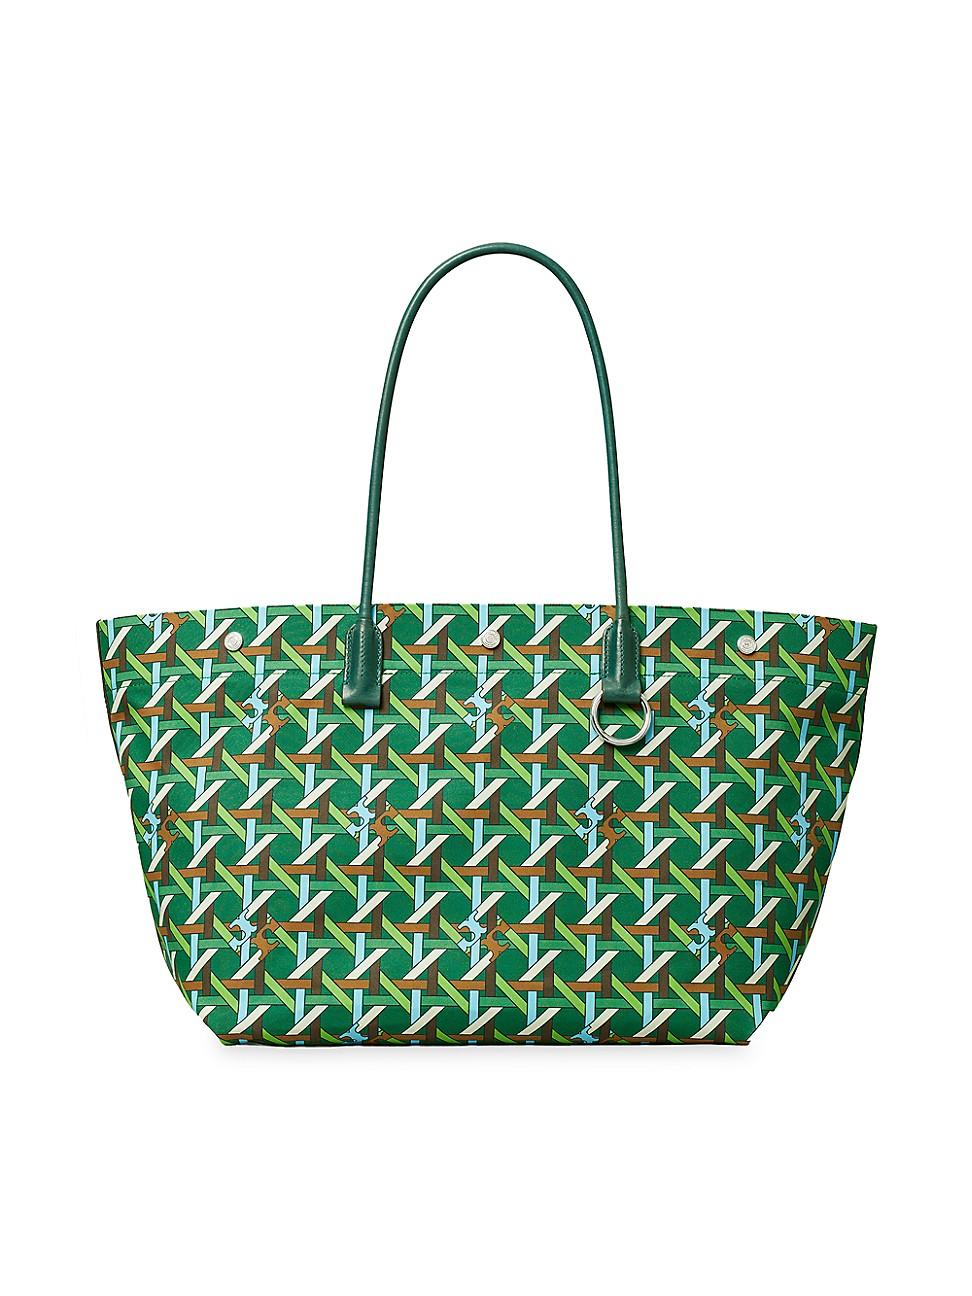 Tory Burch Basketweave Canvas Tote in Green | Lyst